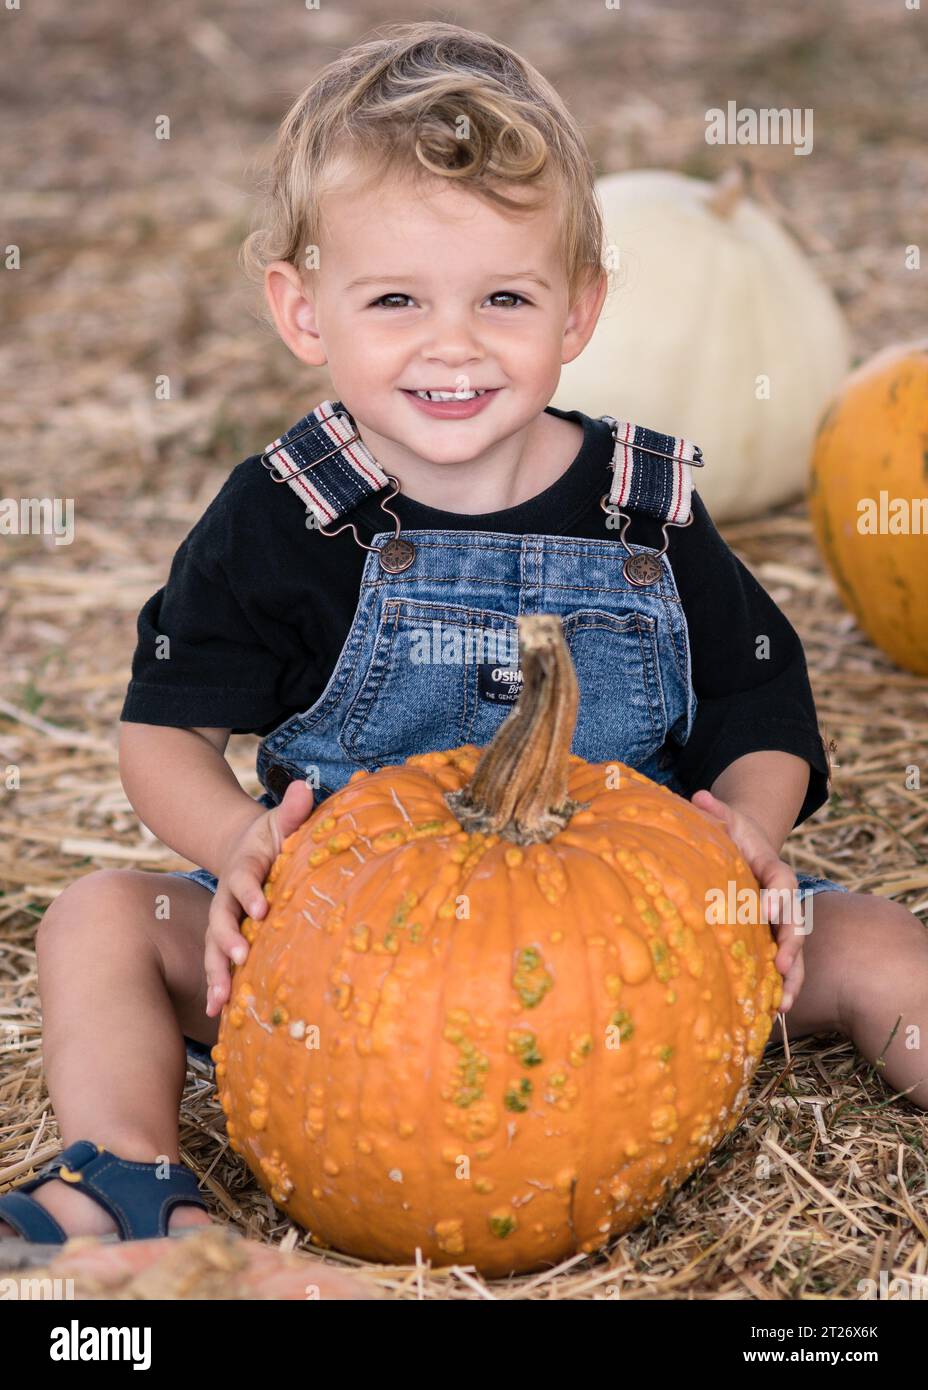 Portrait of a 2 years old boy smiling and holding an orange pumpkin at Deluca Farm in San Pedro, CA. Stock Photo